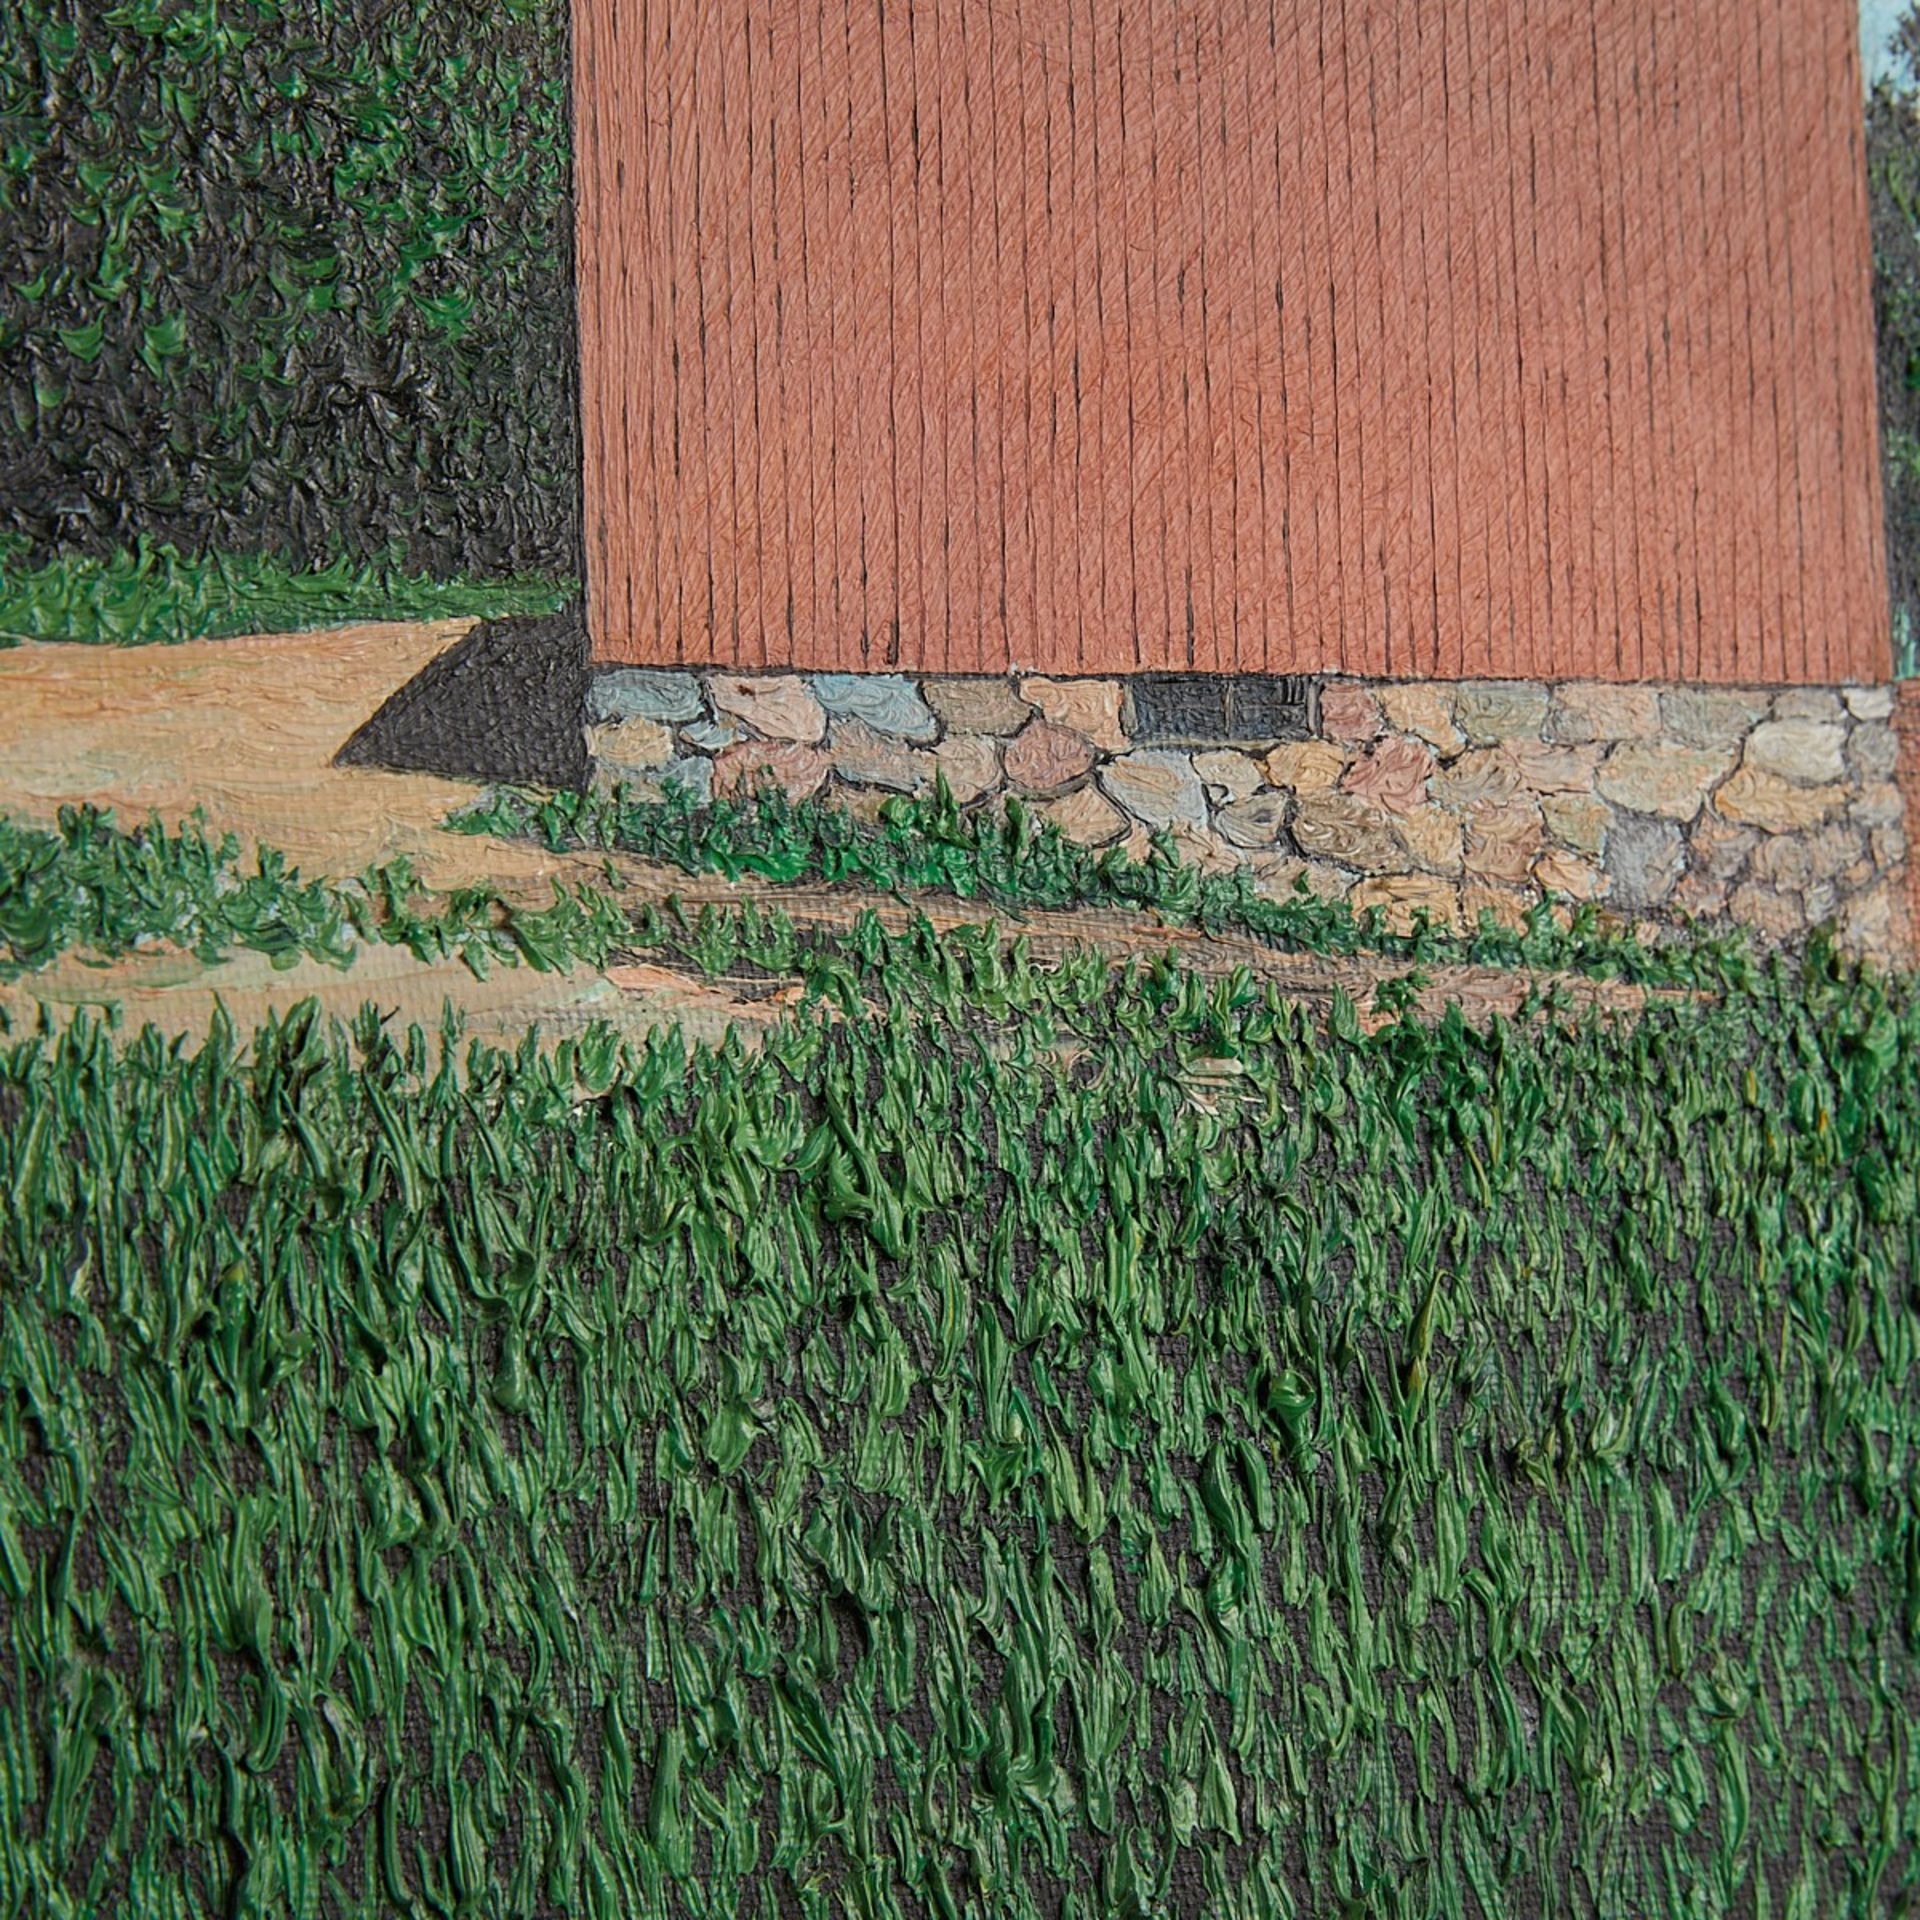 Ron Selbitschka Red Barn Landscape - Image 5 of 7